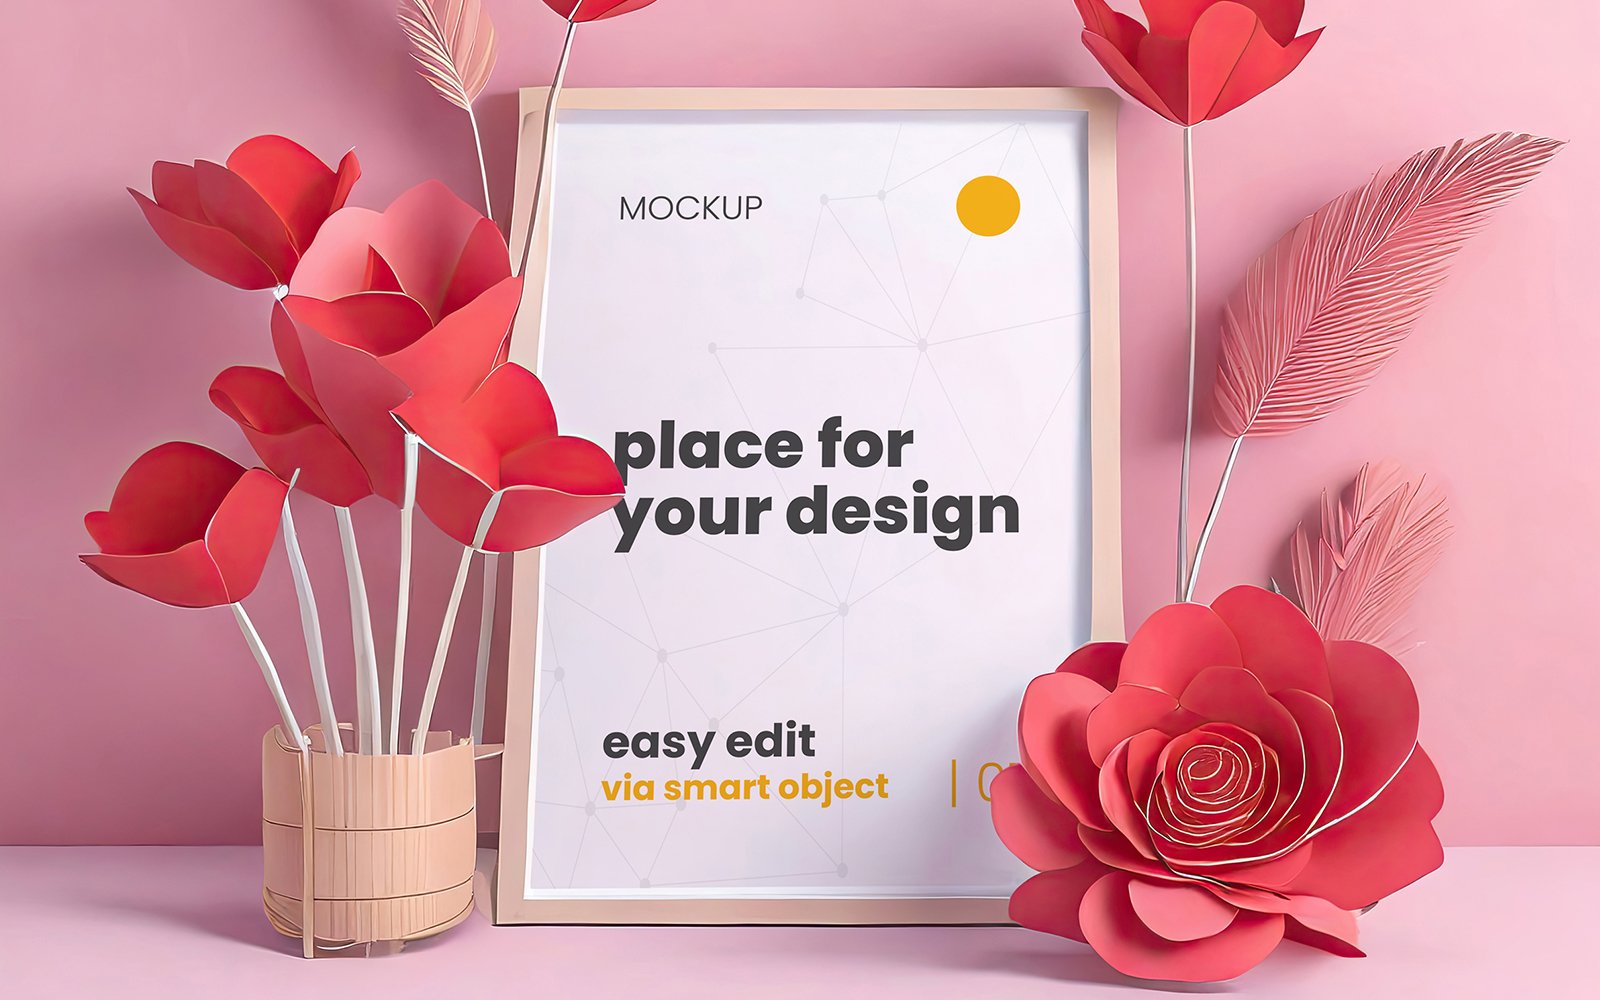 Kit Graphique #381266 Handcrafted Mockup Web Design - Logo template Preview